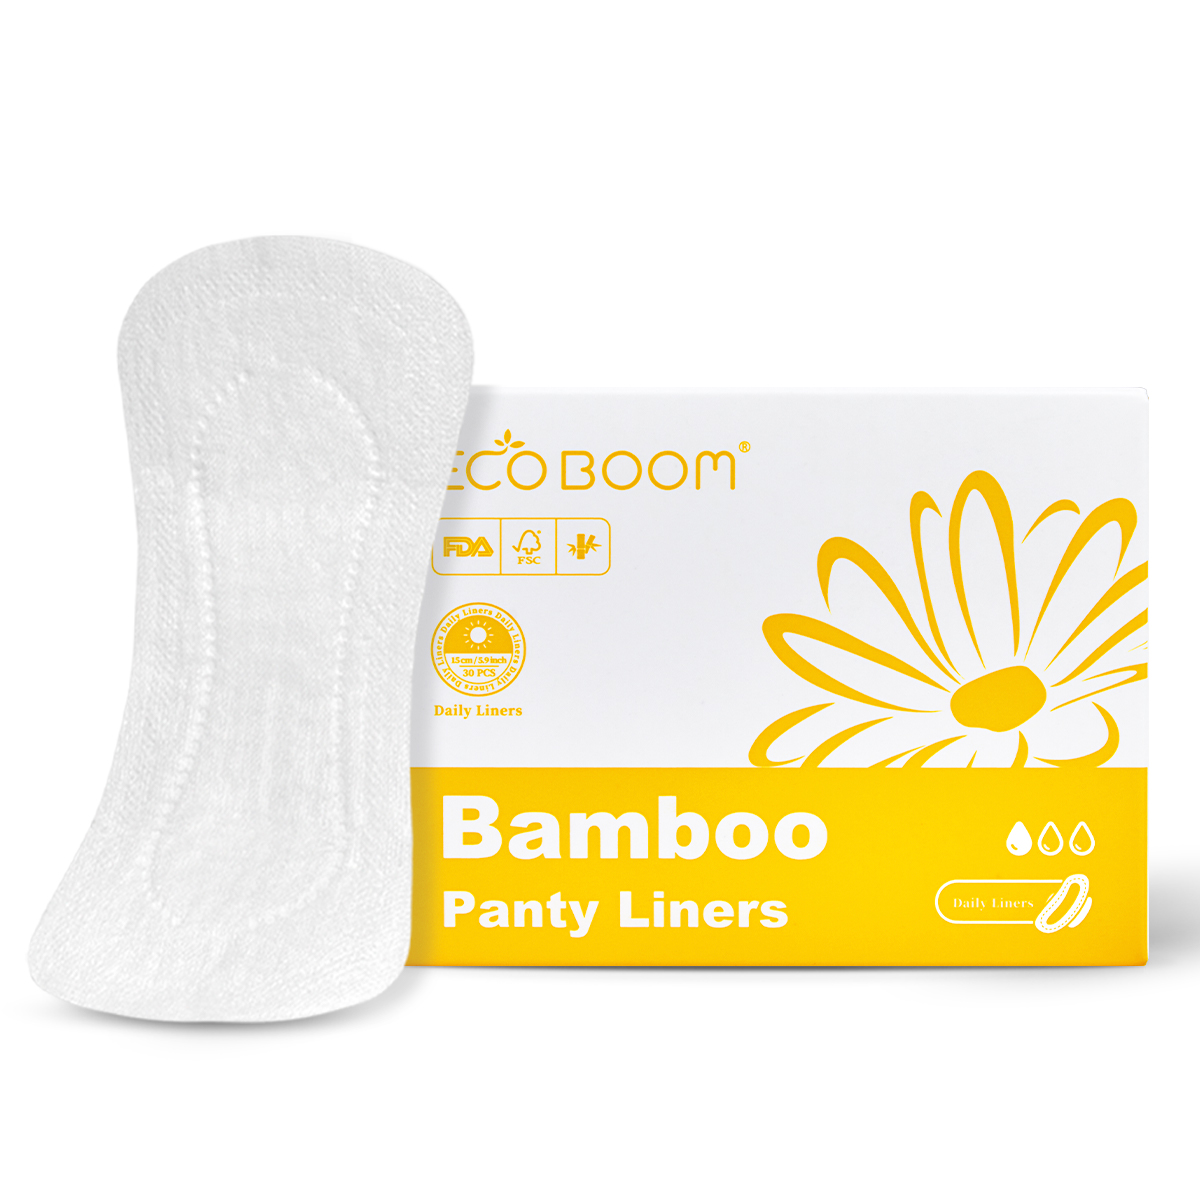 Ecoboom bamboo charcoal sanitary pads factory-1